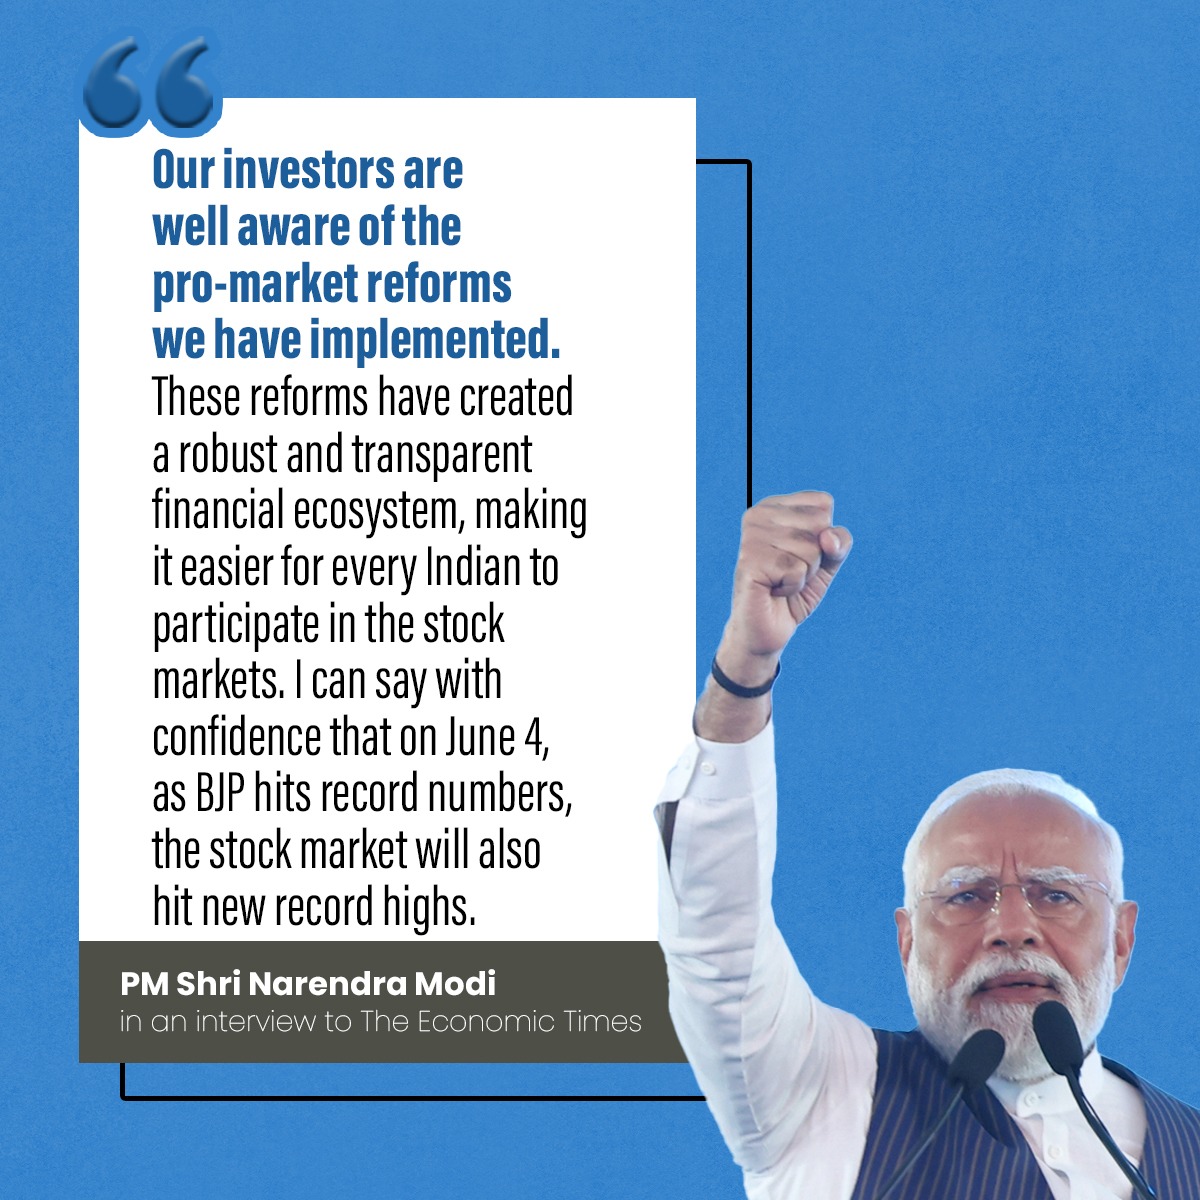 I can say with confidence that on June 4, as BJP hits record numbers, the stock market will also hit new record highs. - PM Shri @narendramodi